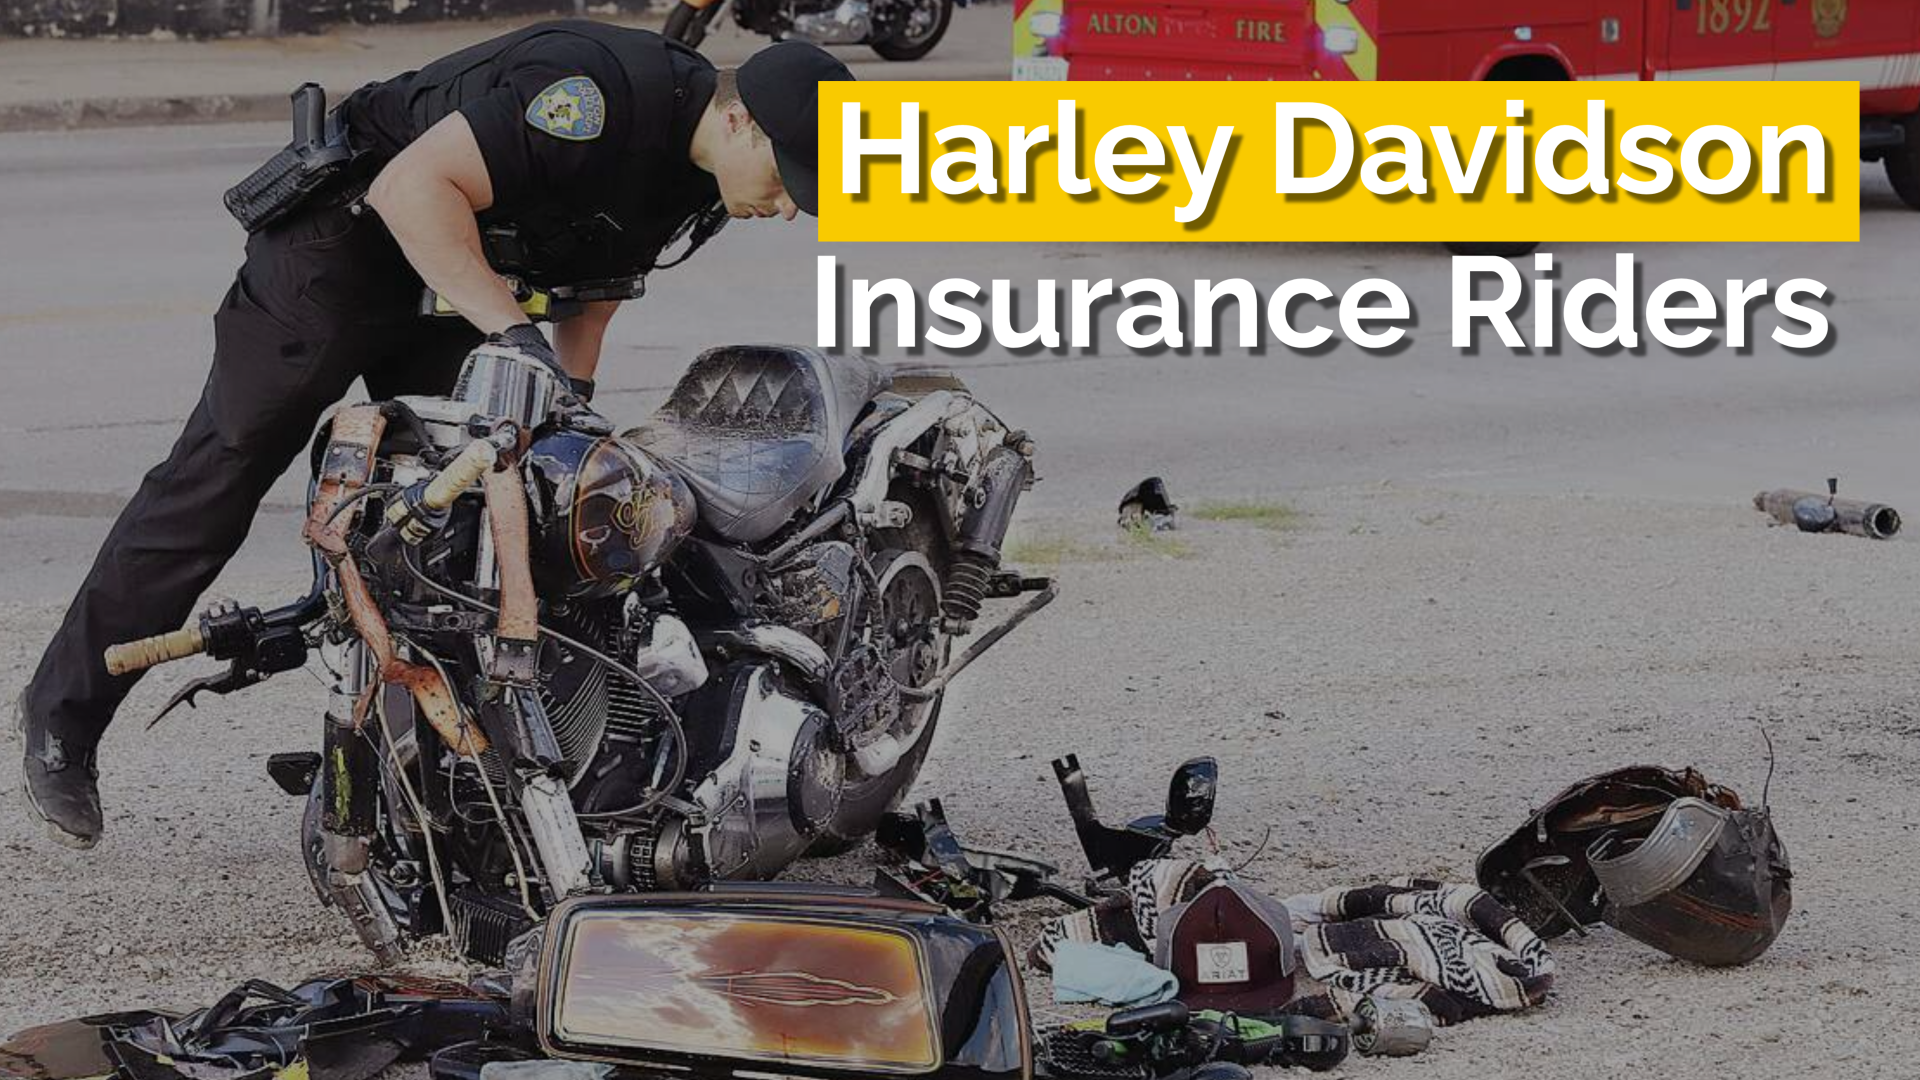 Discover how to enhance your Harley Davidson insurance coverage with additional riders. Explore the options, benefits, and costs to ride worry-free.